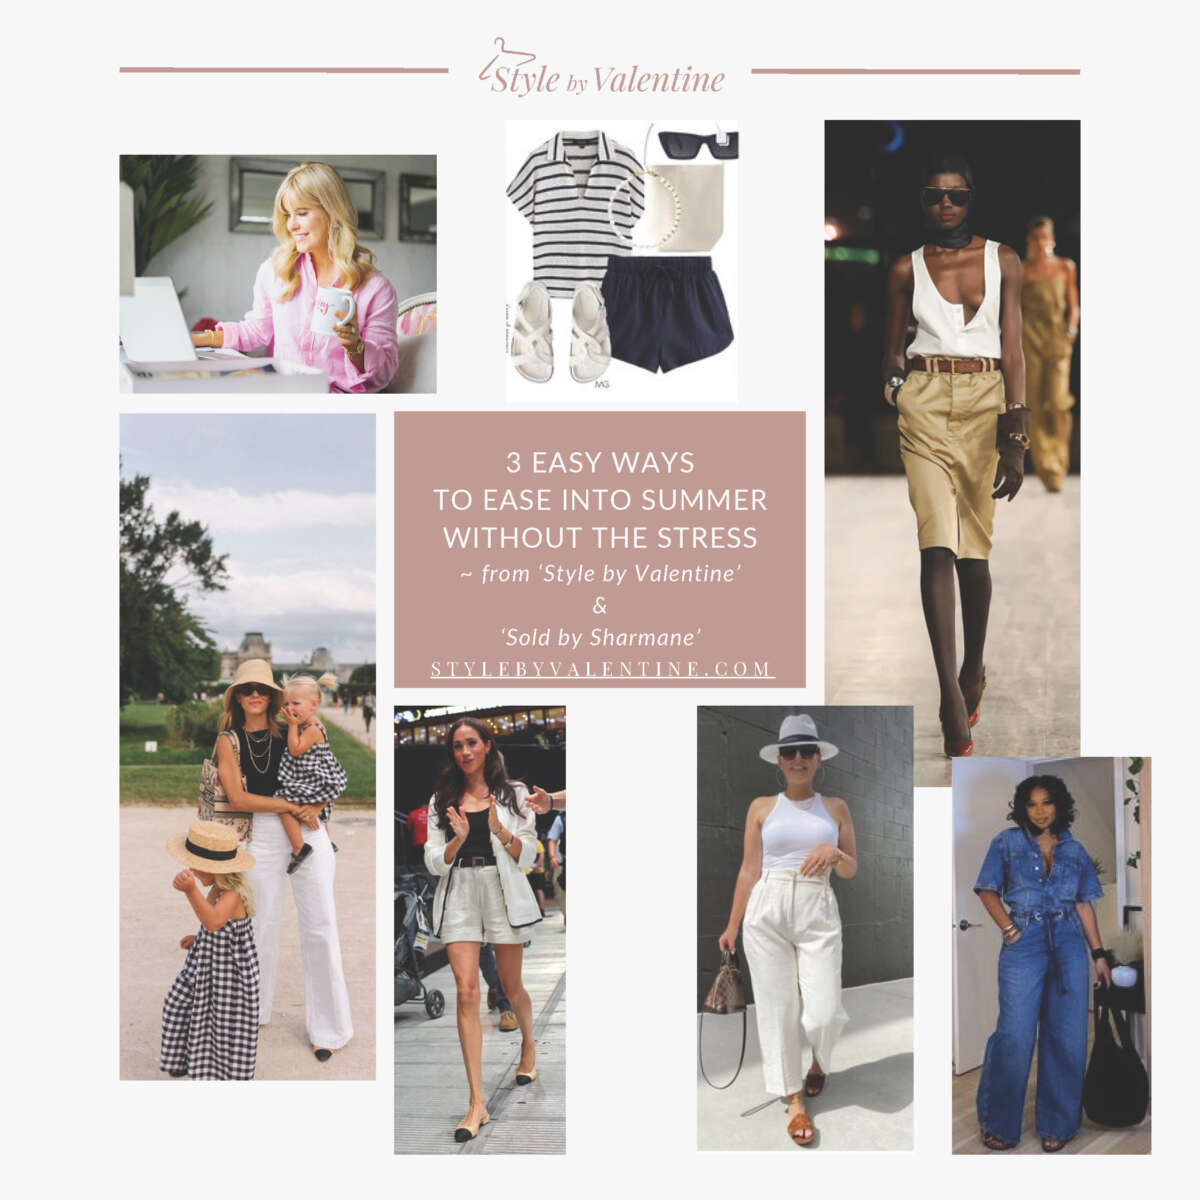 Live Fairfax: Spring into summer with our top fashion picks | Reston Now